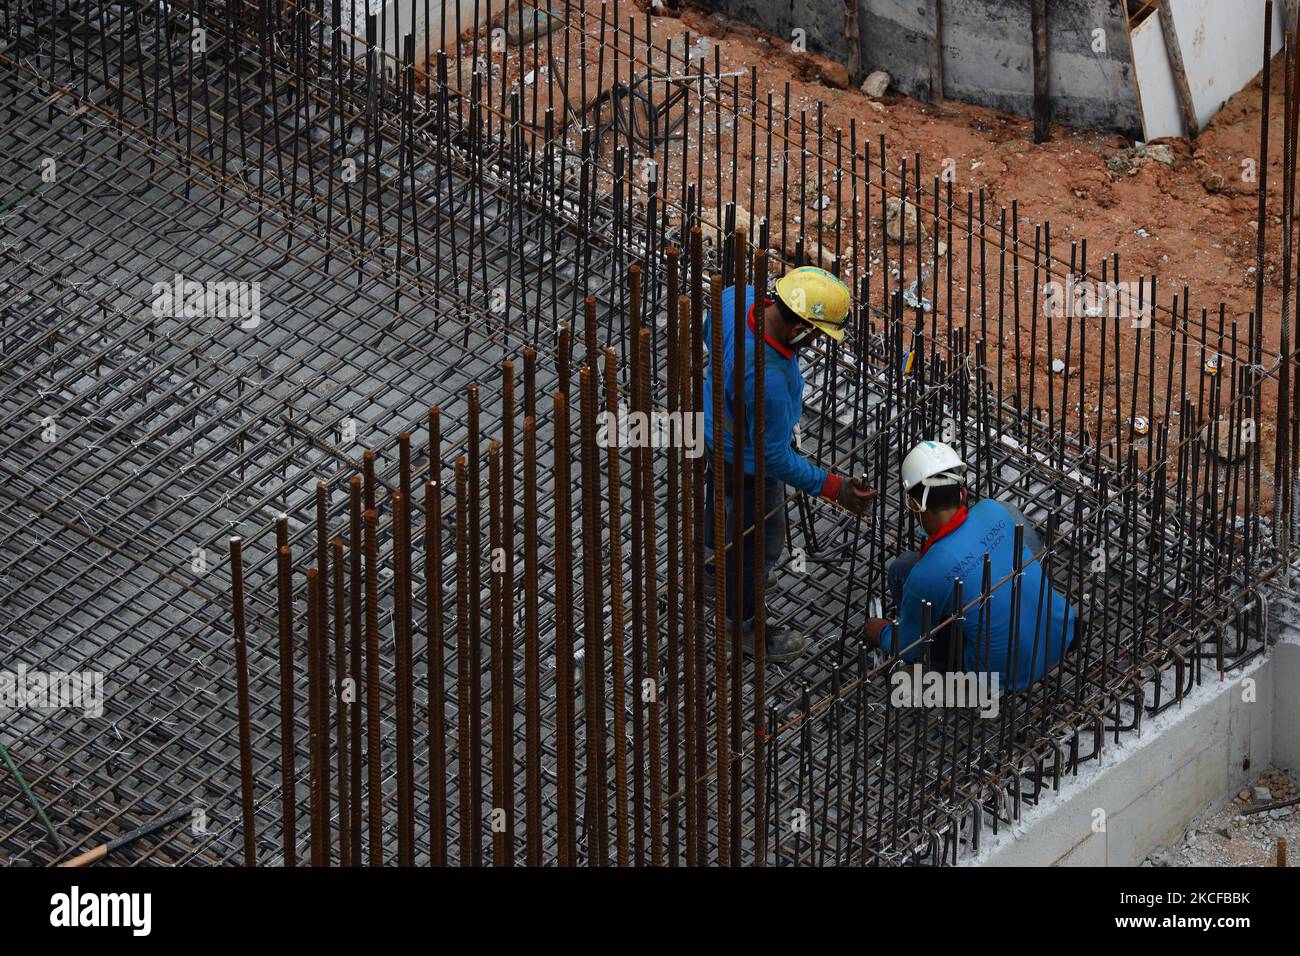 Migrant workers work at a building construction site on May 29, 2021 in Singapore. Singapore enters a month long heightened alert from May 16 to June 13 to curb the spread of COVID-19 cases in the local community. New restrictions on movements and activities have been introduced such as limiting social interaction to two, prohibiting dining out and a reduced operating capacity at shopping malls, offices and attractions. On May 17, the construction industry stakeholders appealed to Multi-Ministry Taskforce to bring in foreign workers in a safe and controlled manner after the built environment i Stock Photo